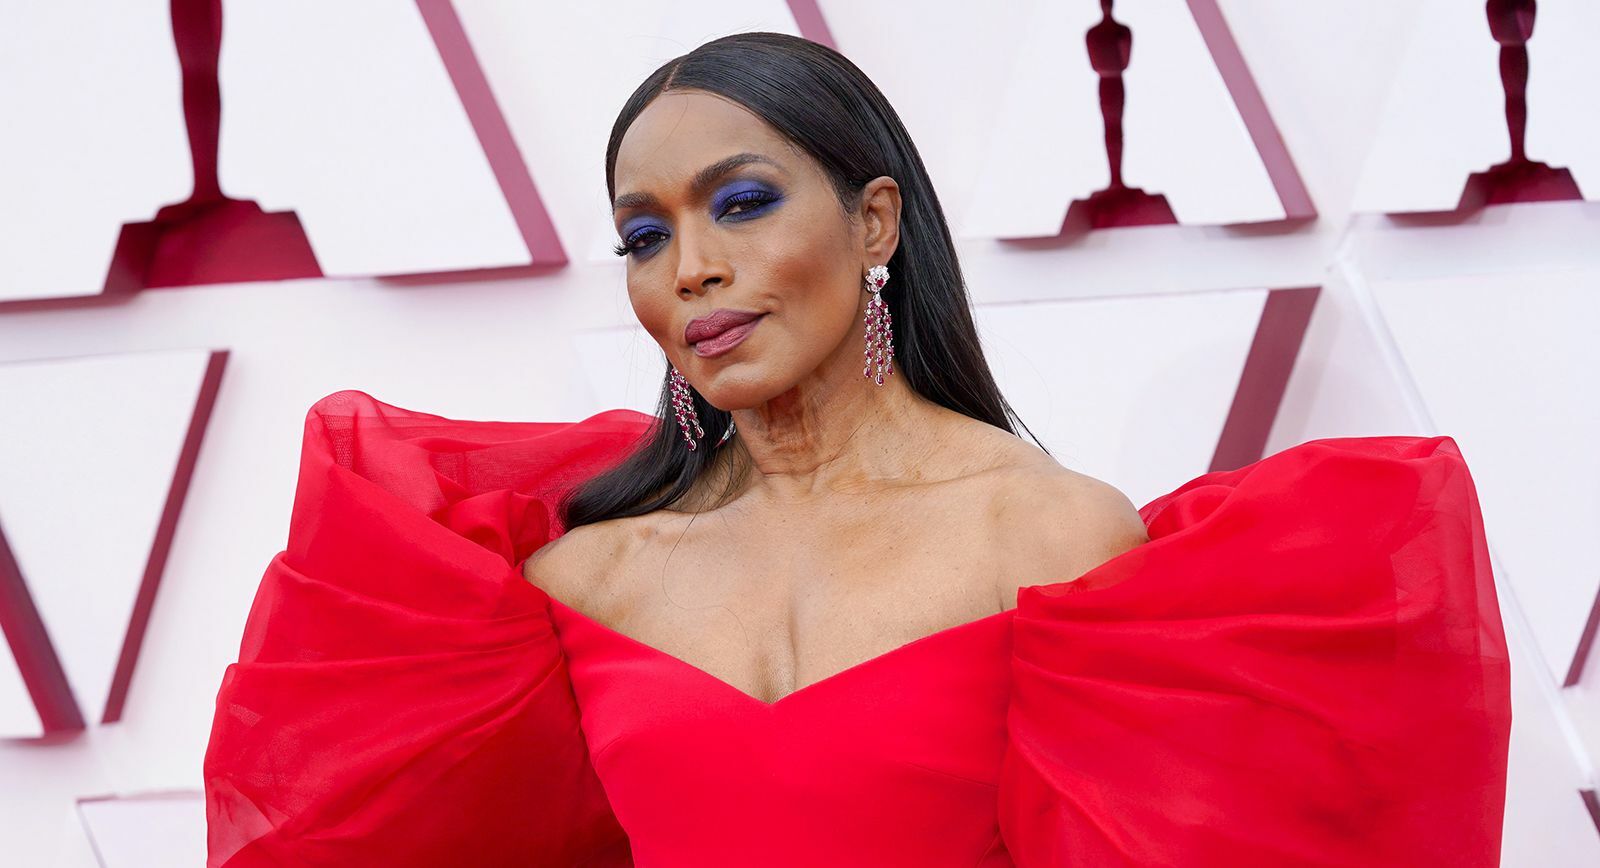 Angela Bassett in a pair of Chopard earrings with 28.19 carats of rubies at the 93rd Academy Awards 2021